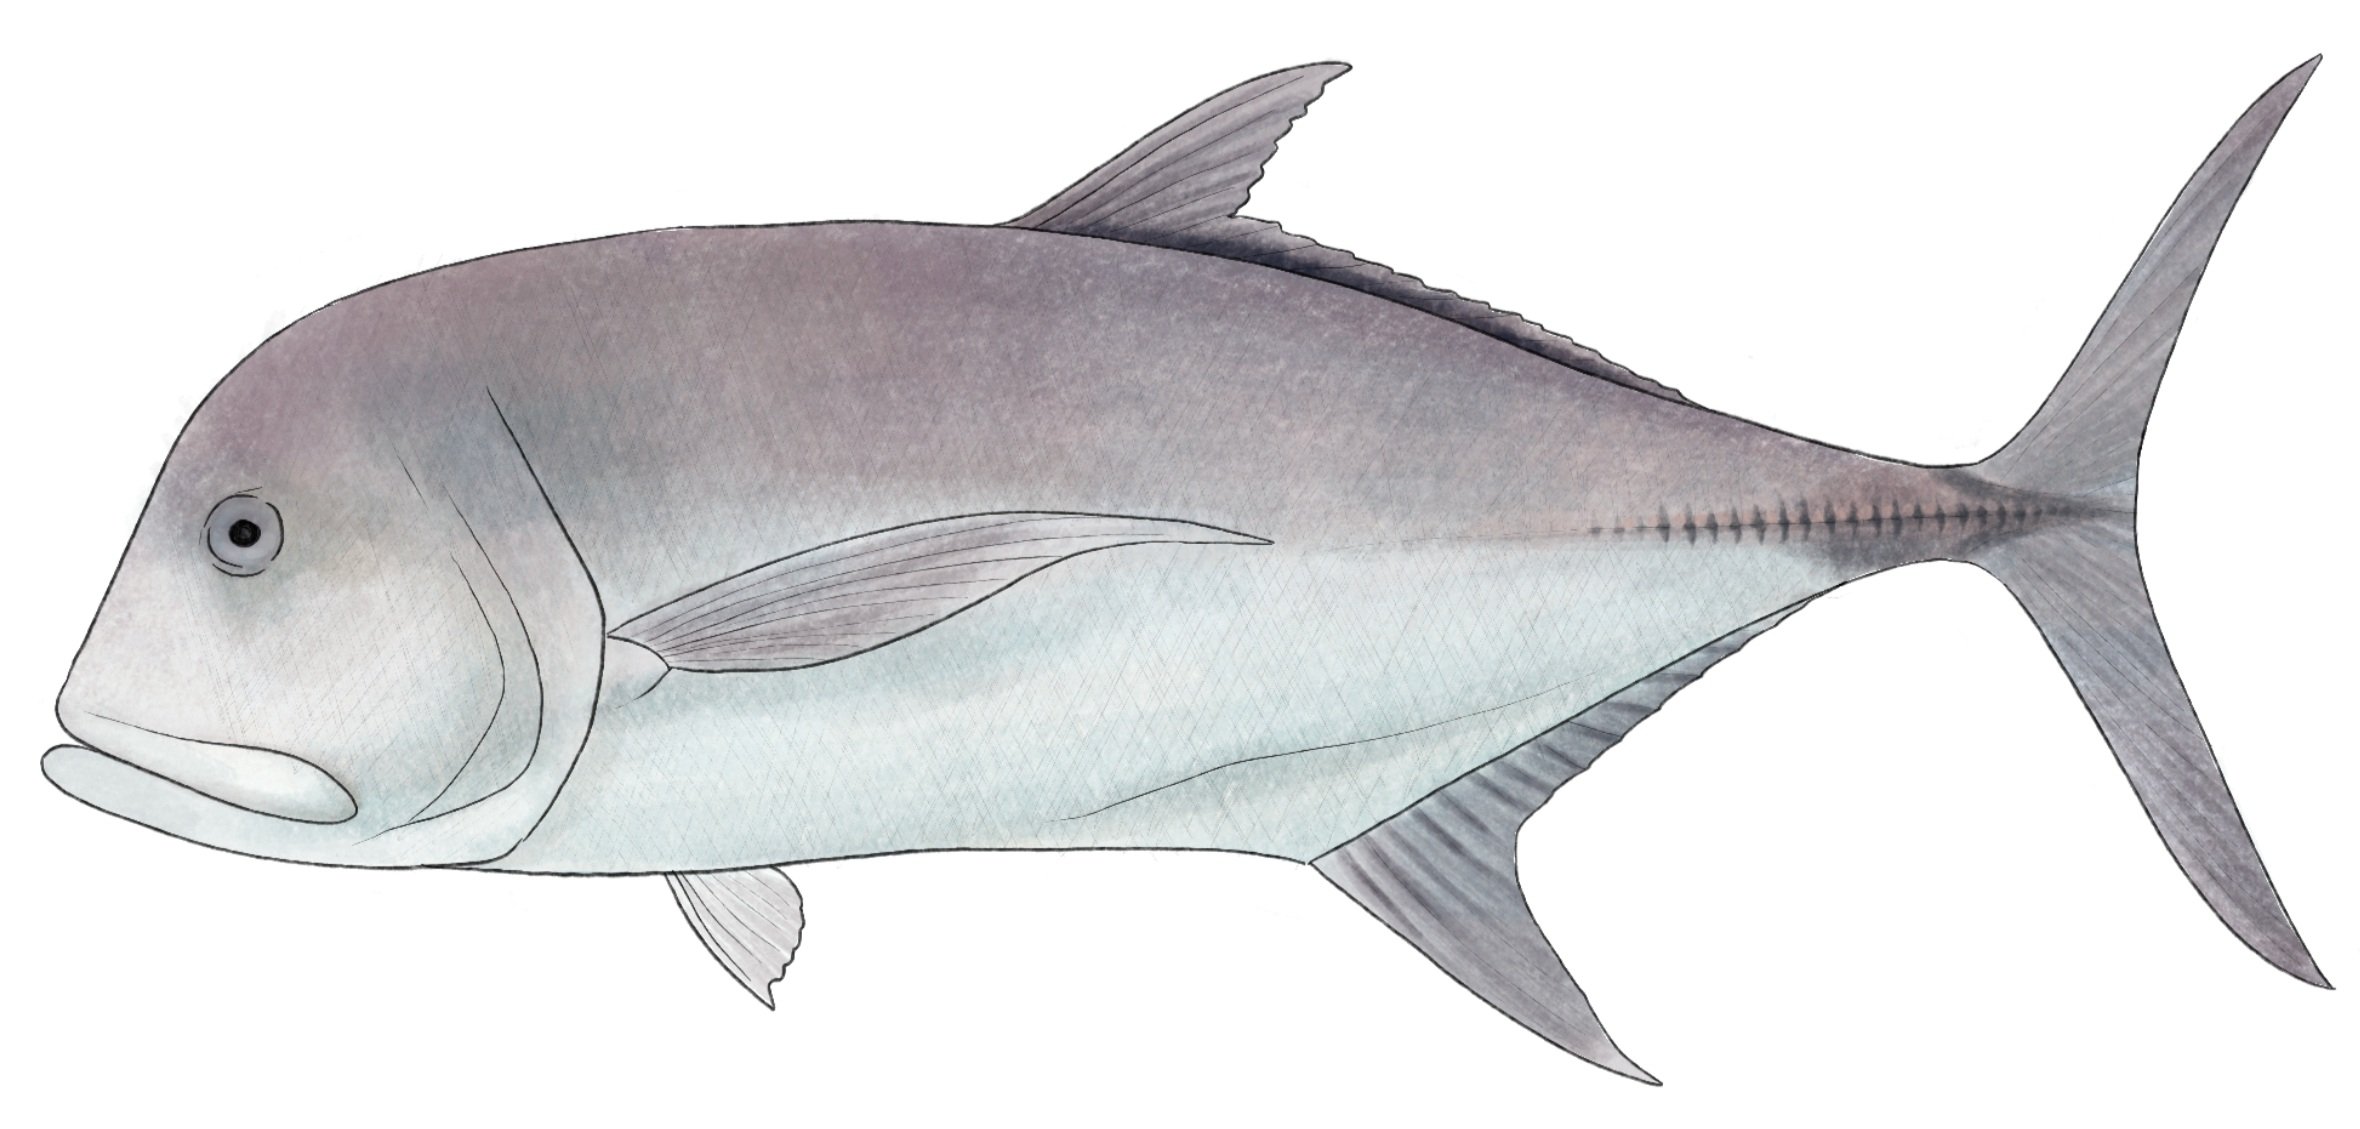 Giant trevally - By Lilly Crosby